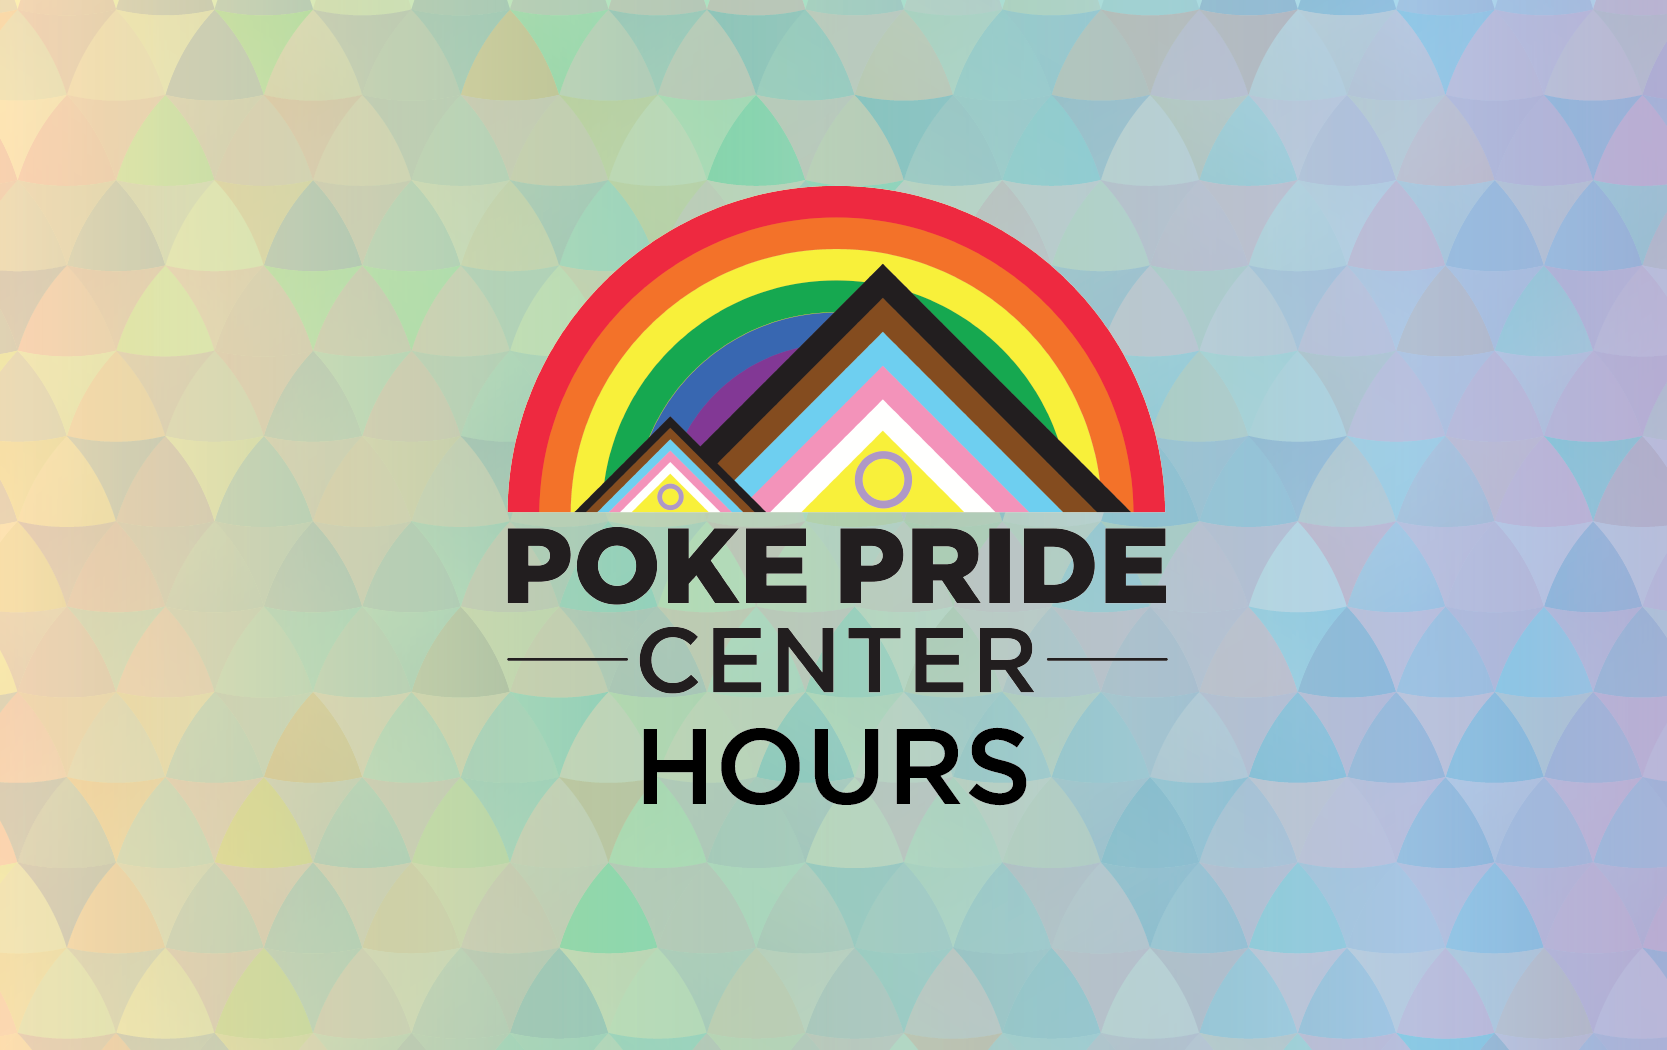 poke pride center hours with rainbow triangles